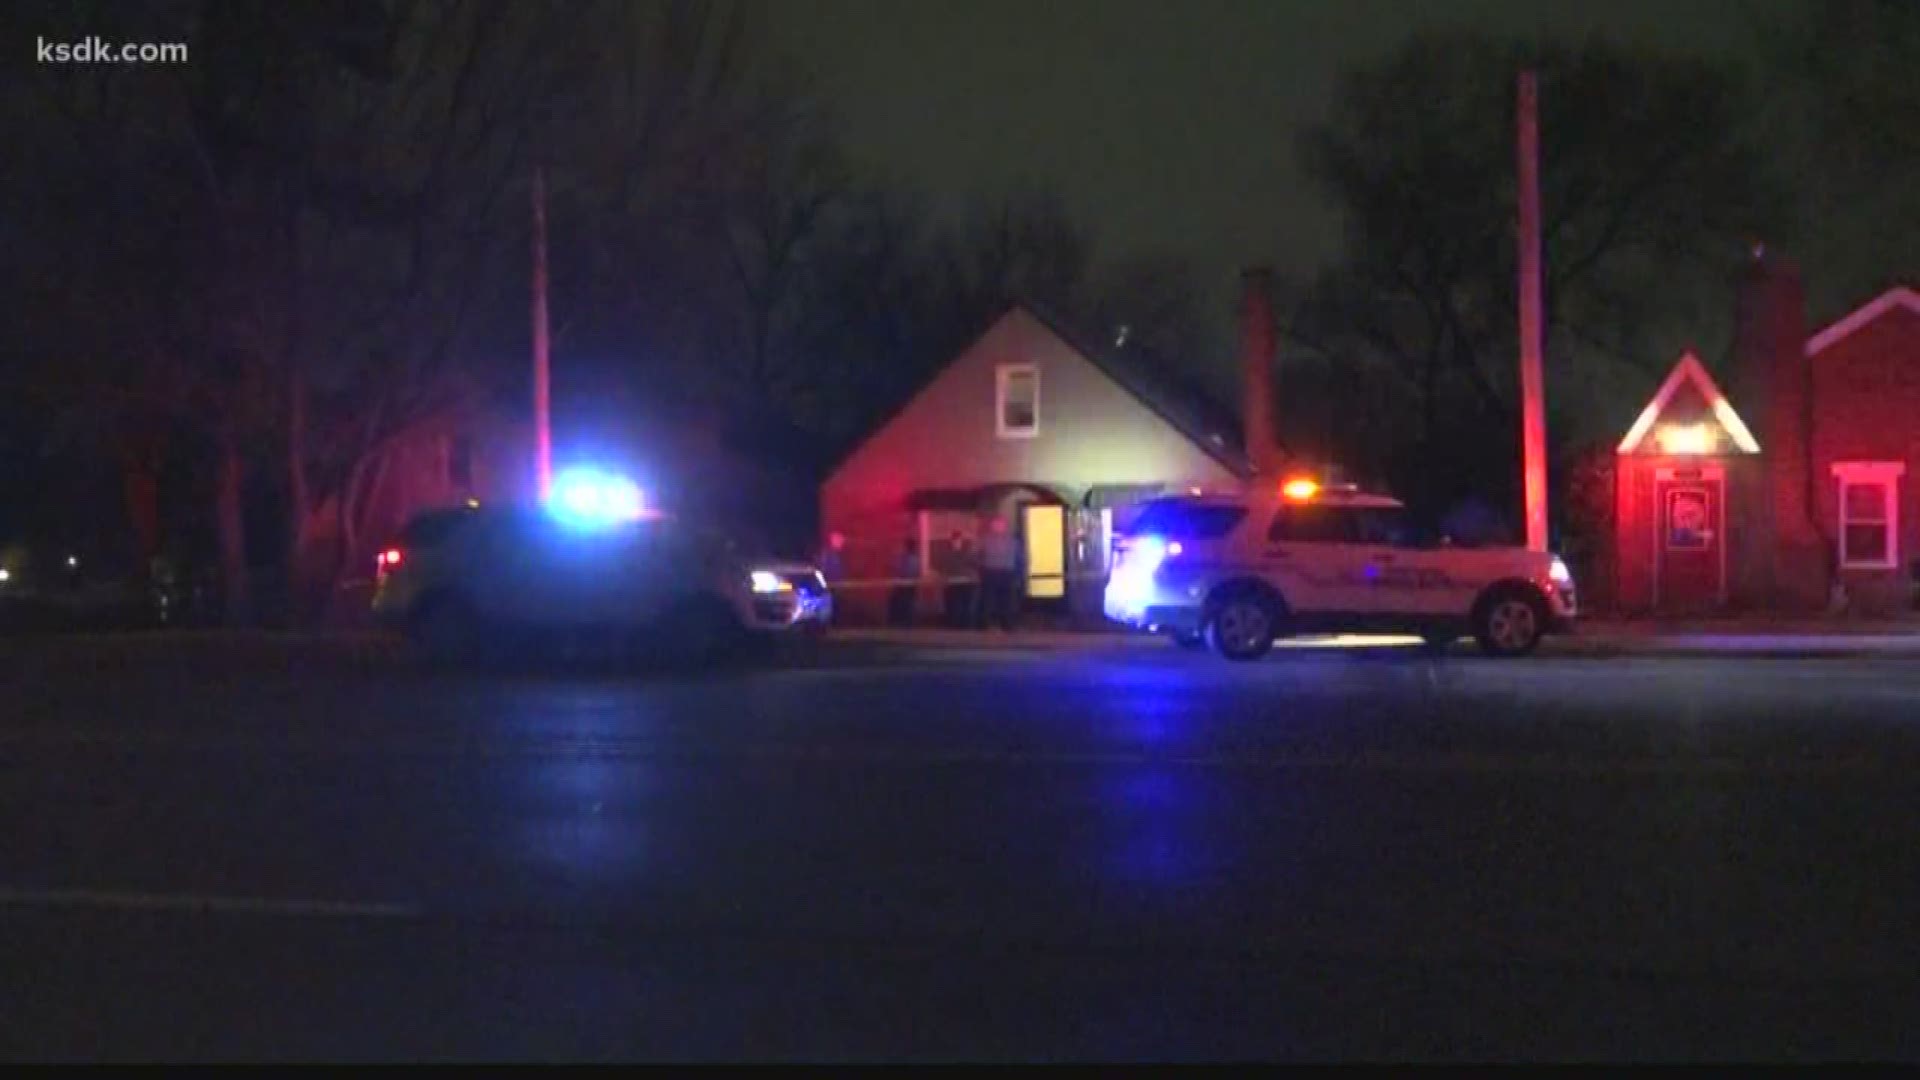 The shooting happened at a home along North Florissant Avenue.